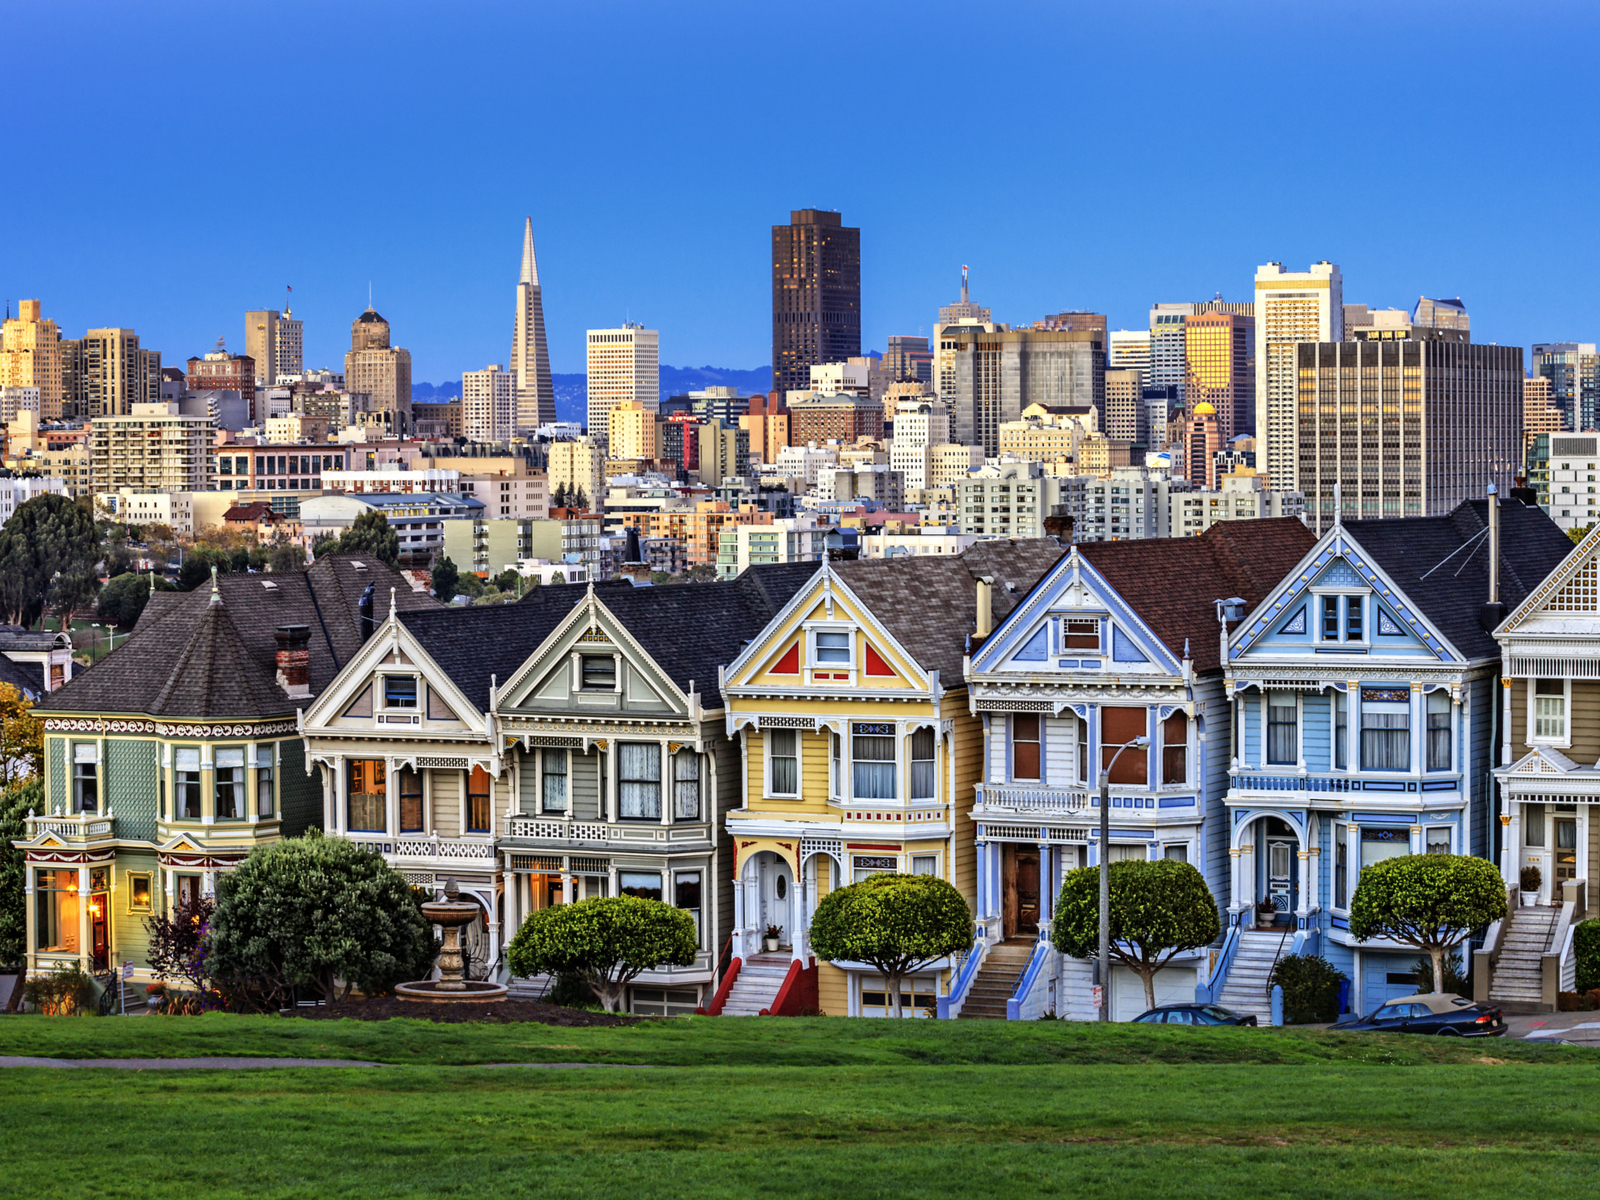 The Painted Ladies as viewed from Alamo Square, one of the best things to do in San Francisco